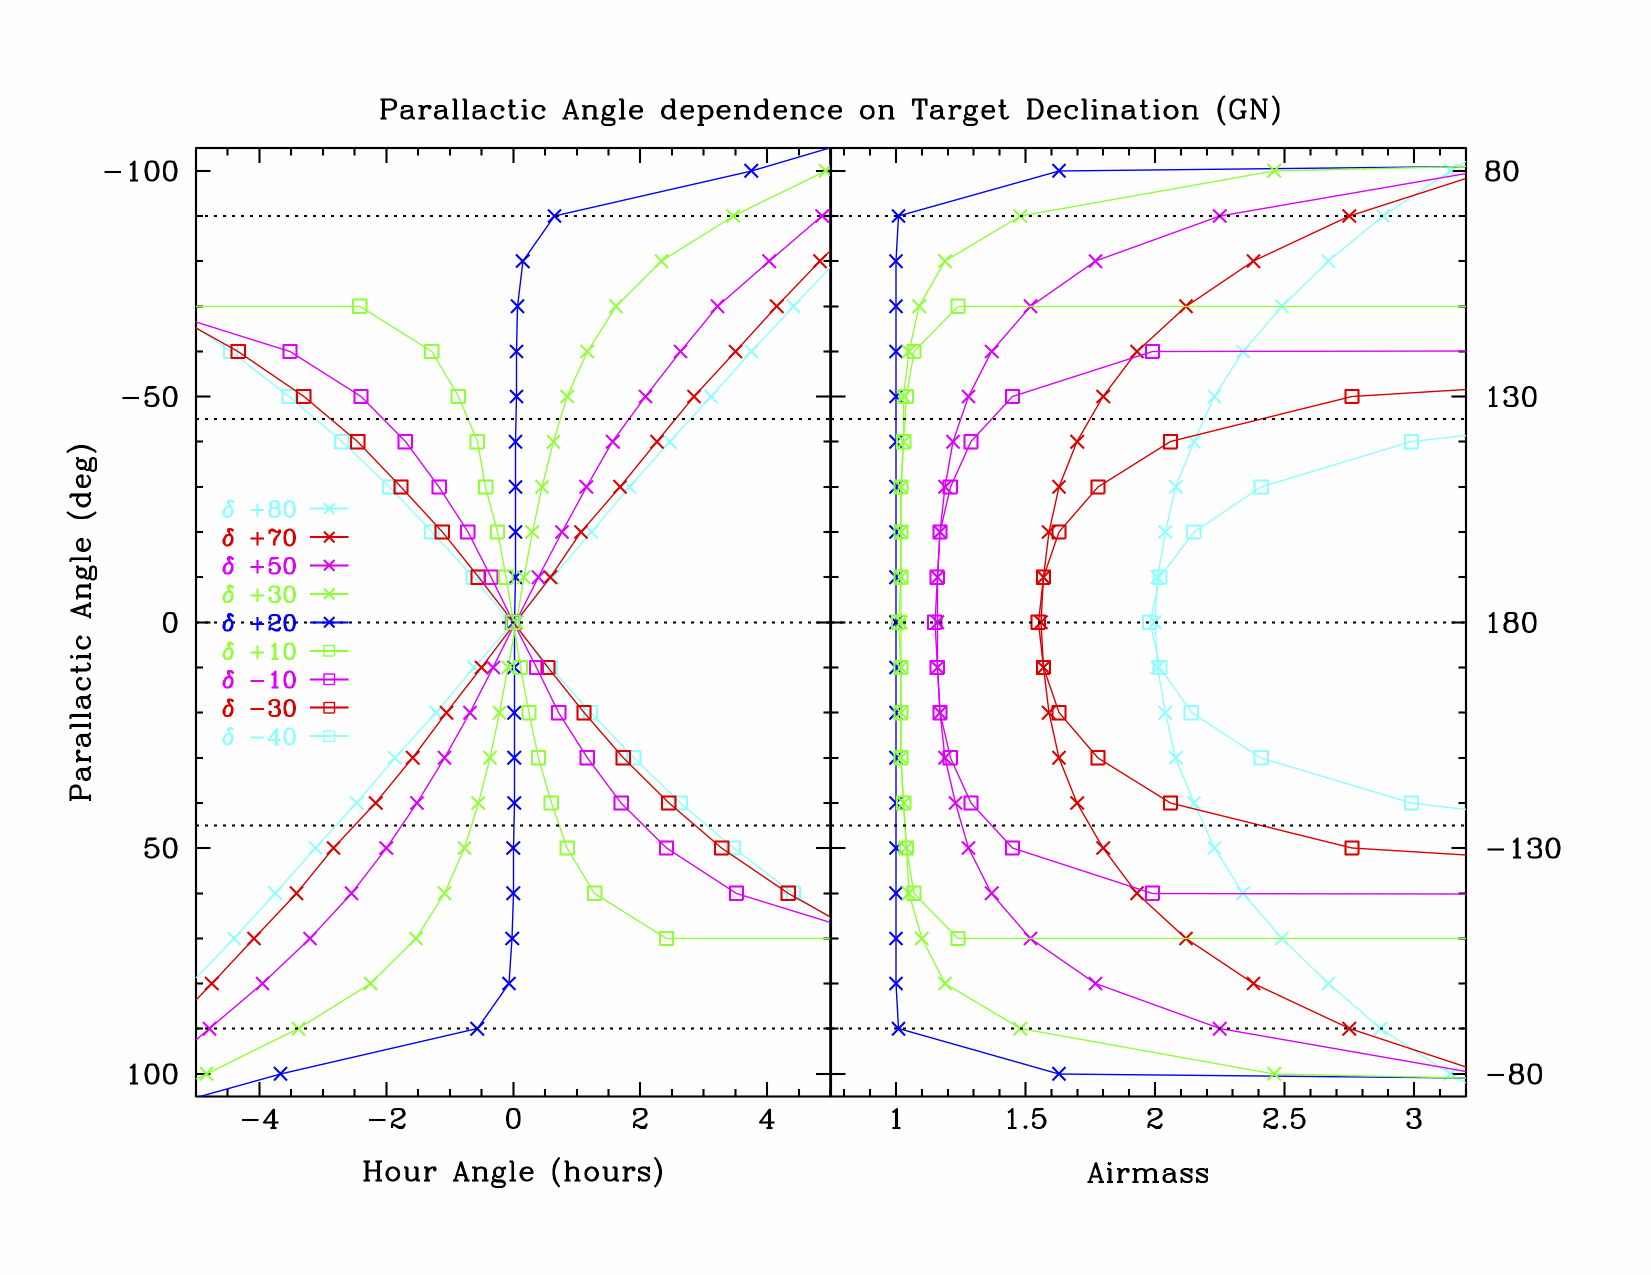 Parallactic Angle as a function of Hour Angle and Airmass for different Target Declinations (Mauna Kea)